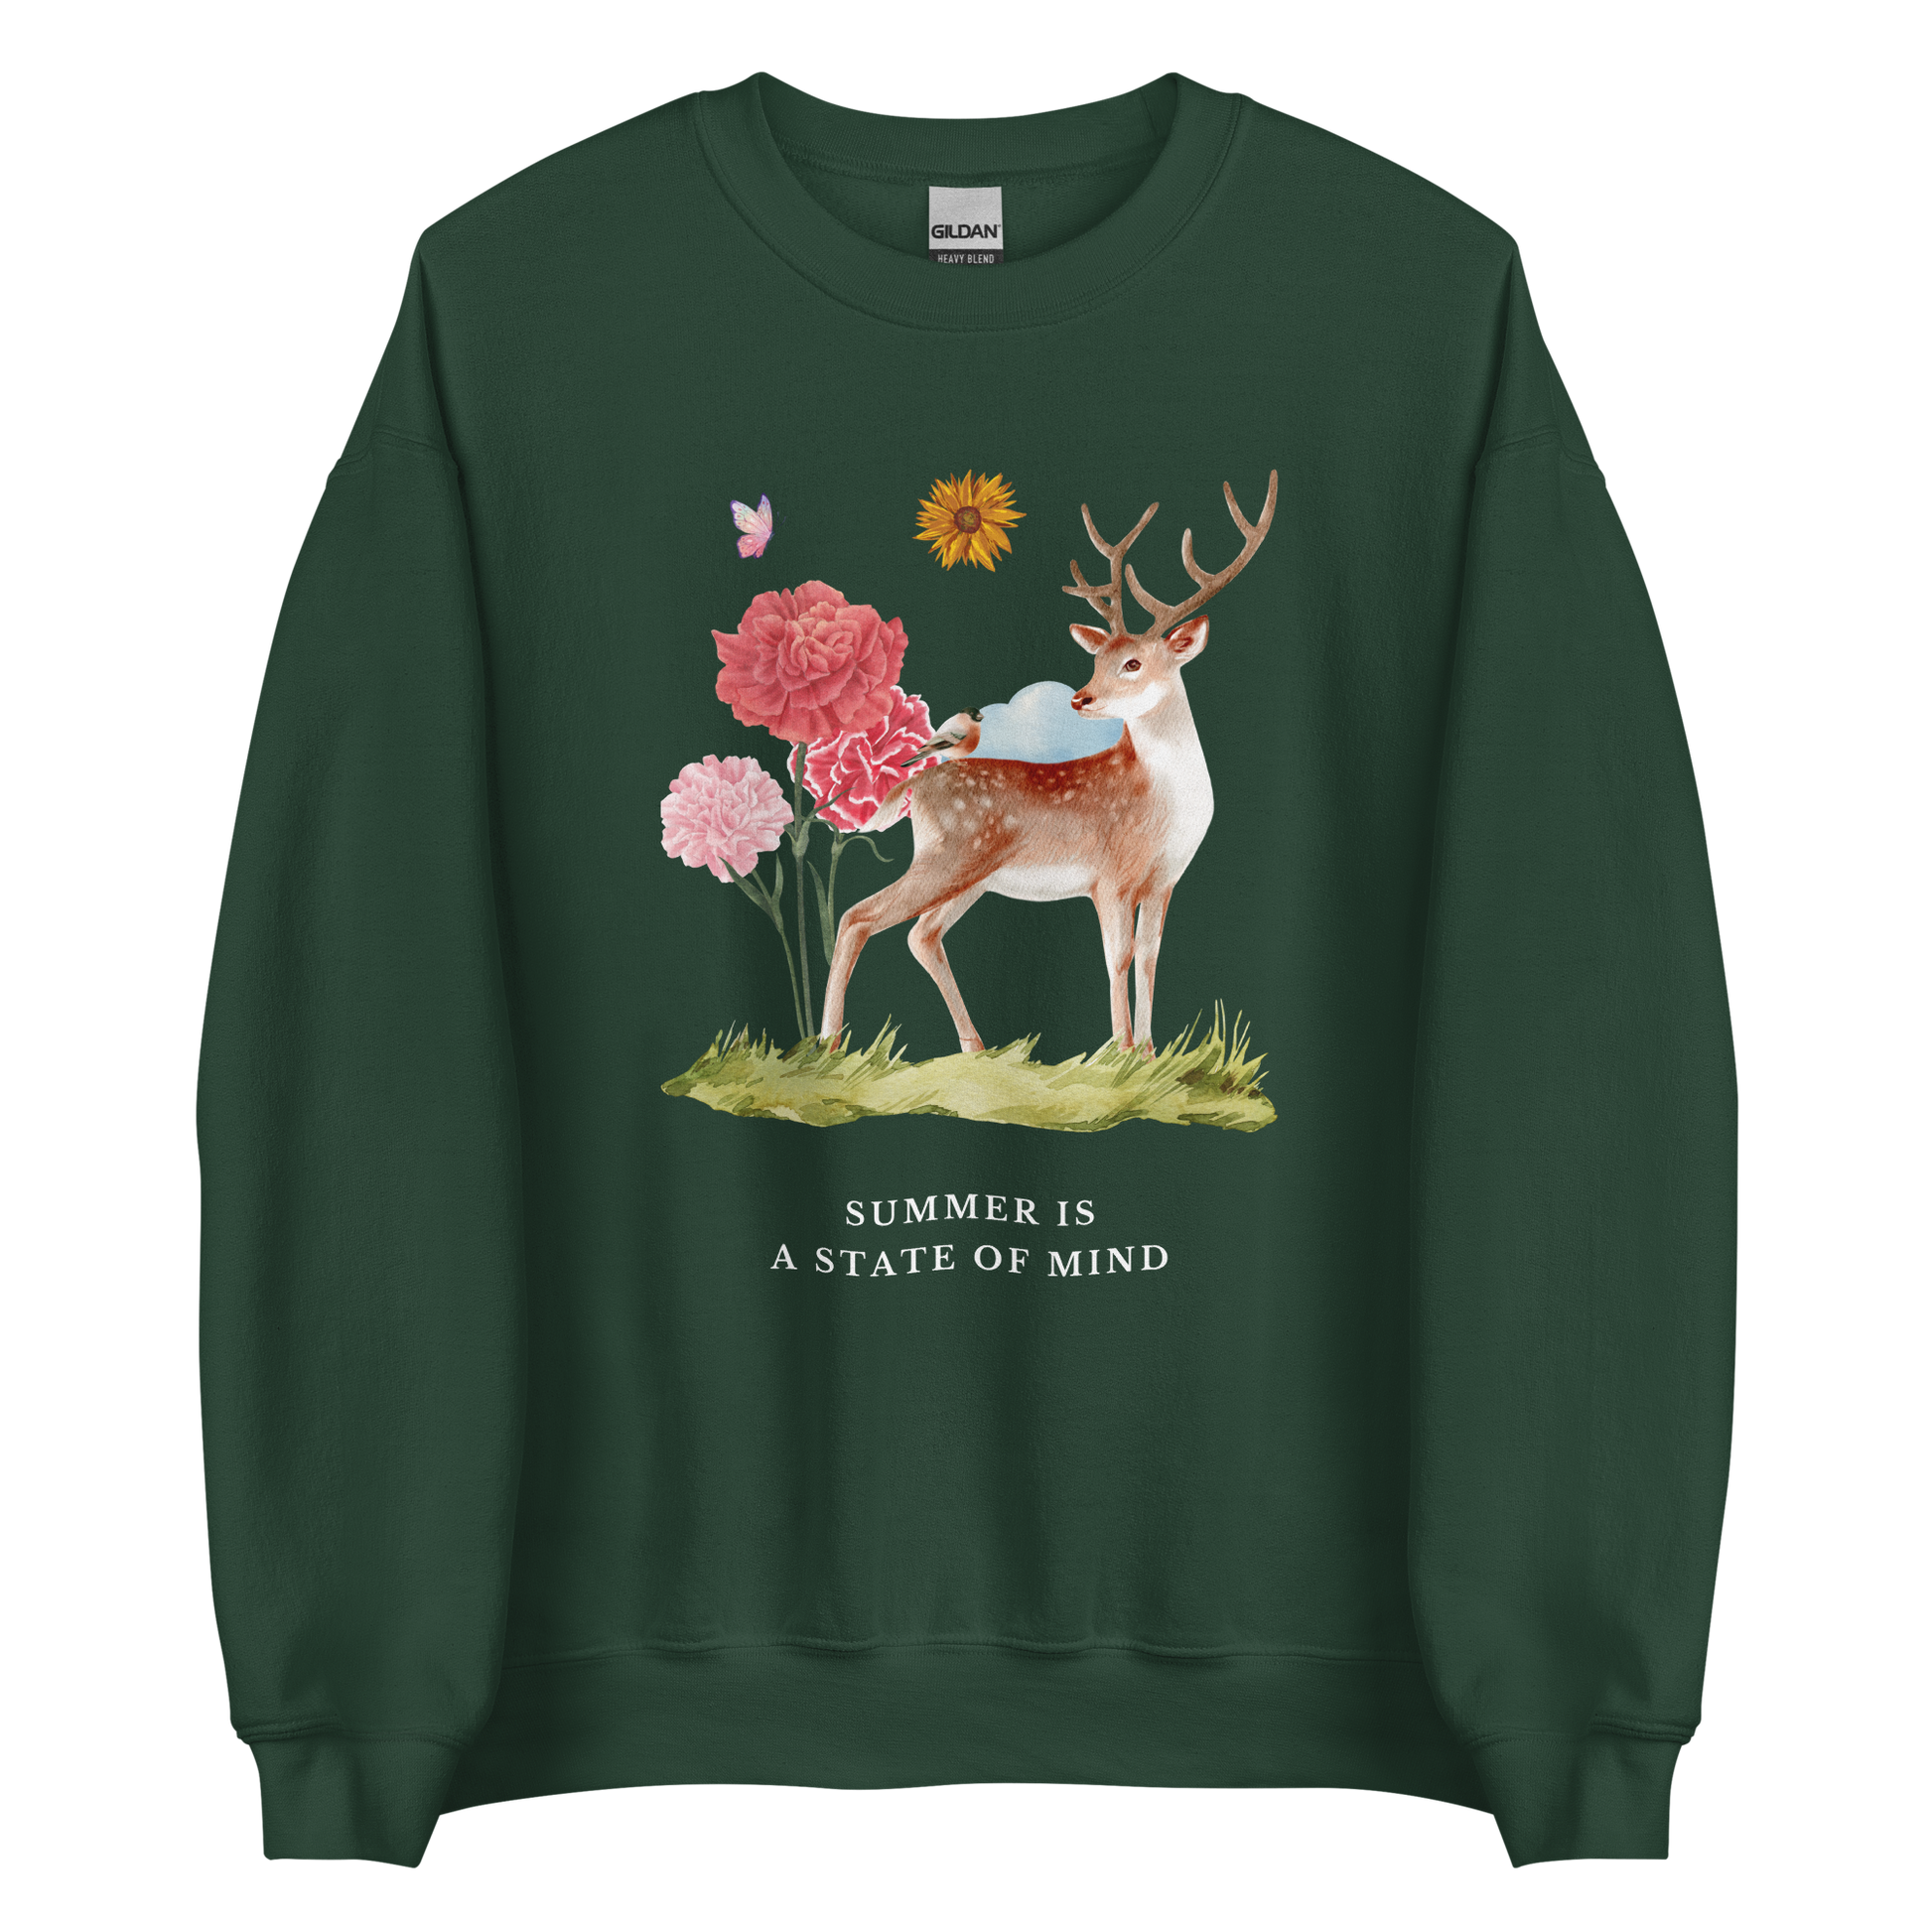 Forest Green Summer Is a State of Mind Sweatshirt featuring a Summer Is a State of Mind graphic on the chest - Cute Graphic Summer Sweatshirts - Boozy Fox